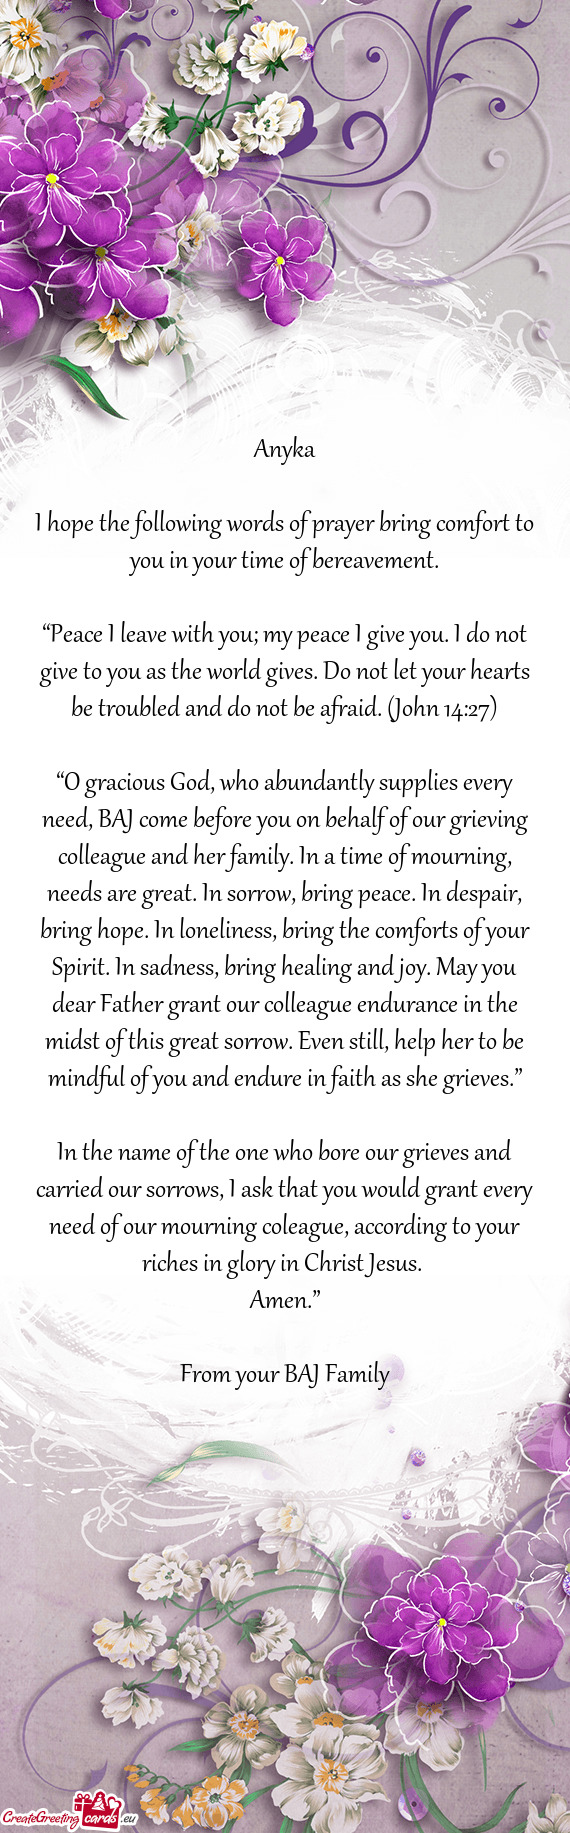 I hope the following words of prayer bring comfort to you in your time of bereavement